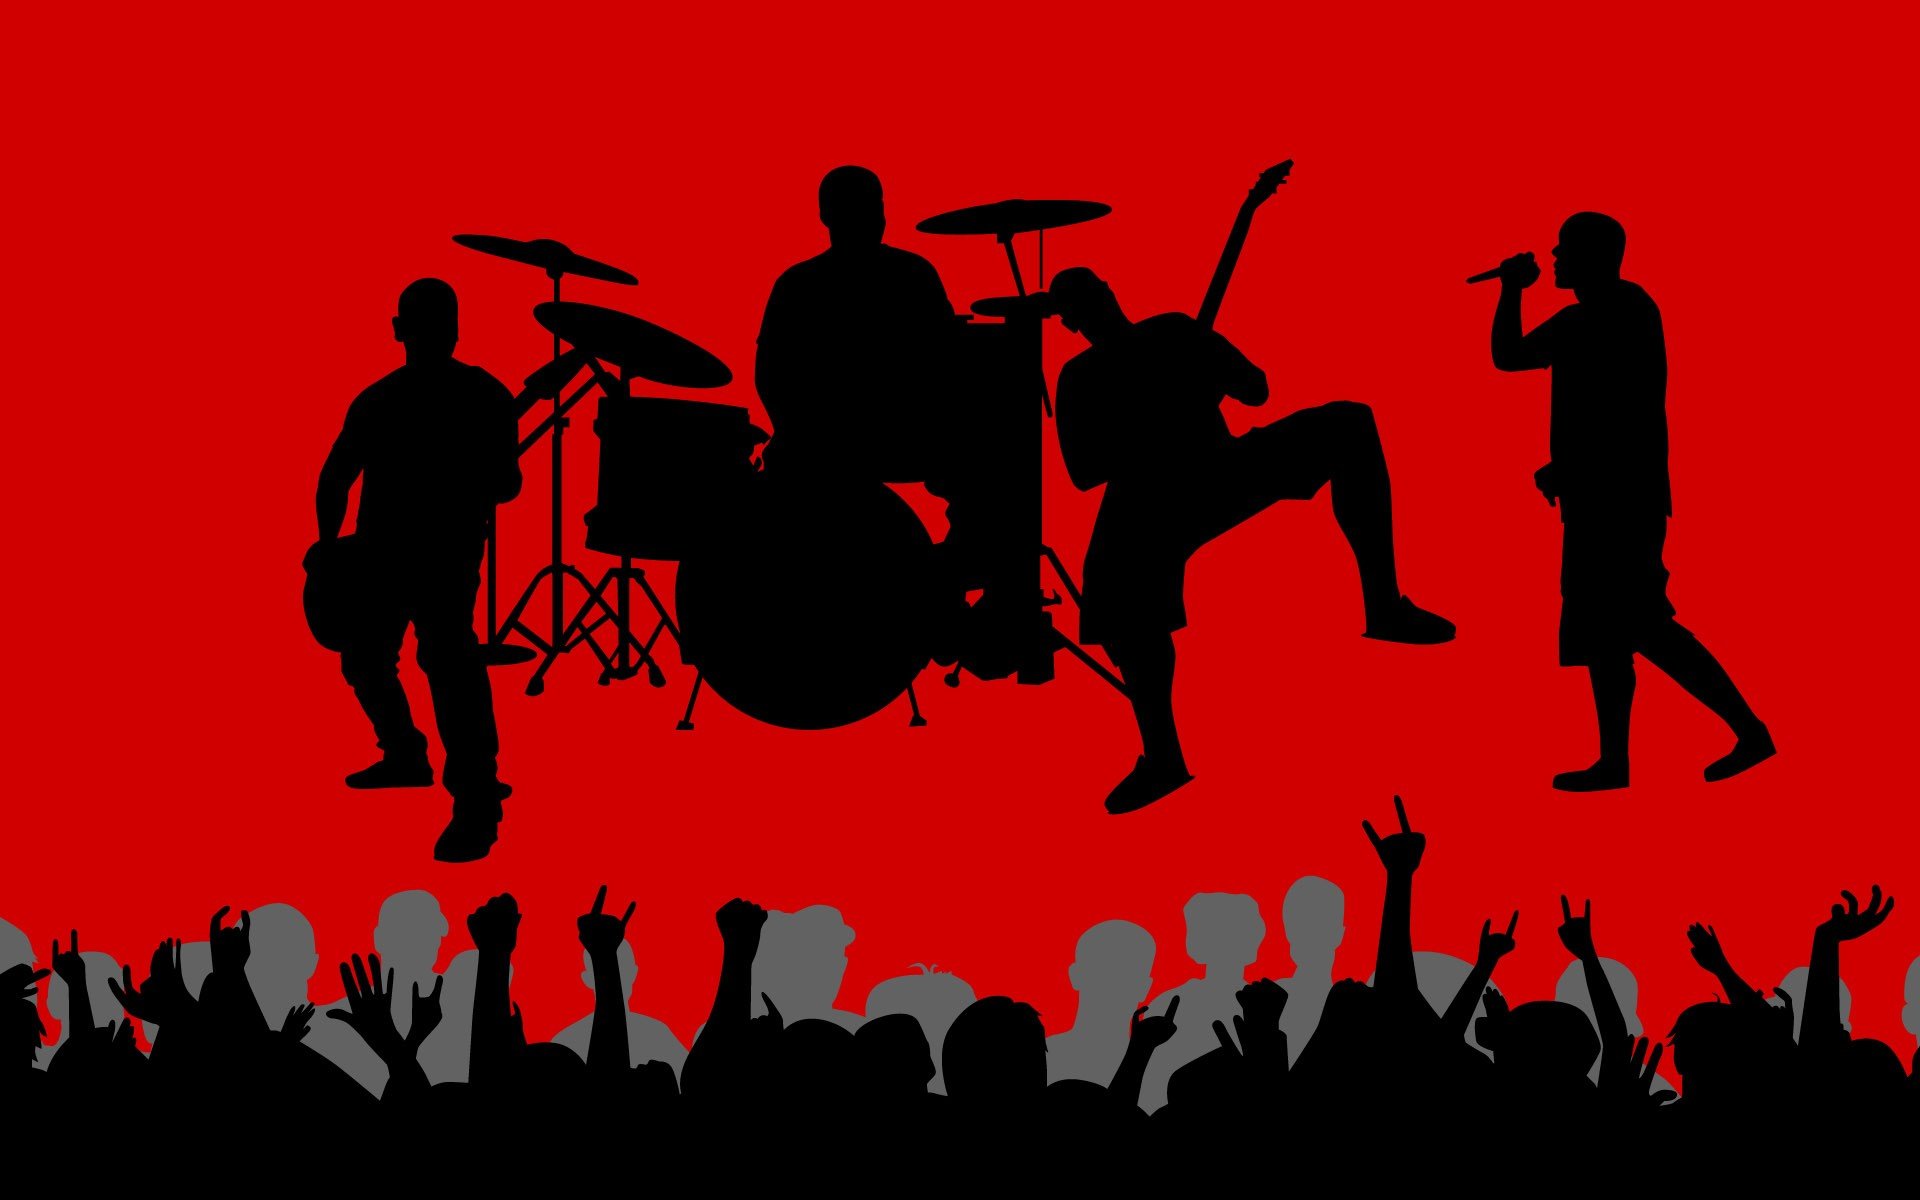 music, Vectors, Shadows, Crowd, Band, Red, Background Wallpaper